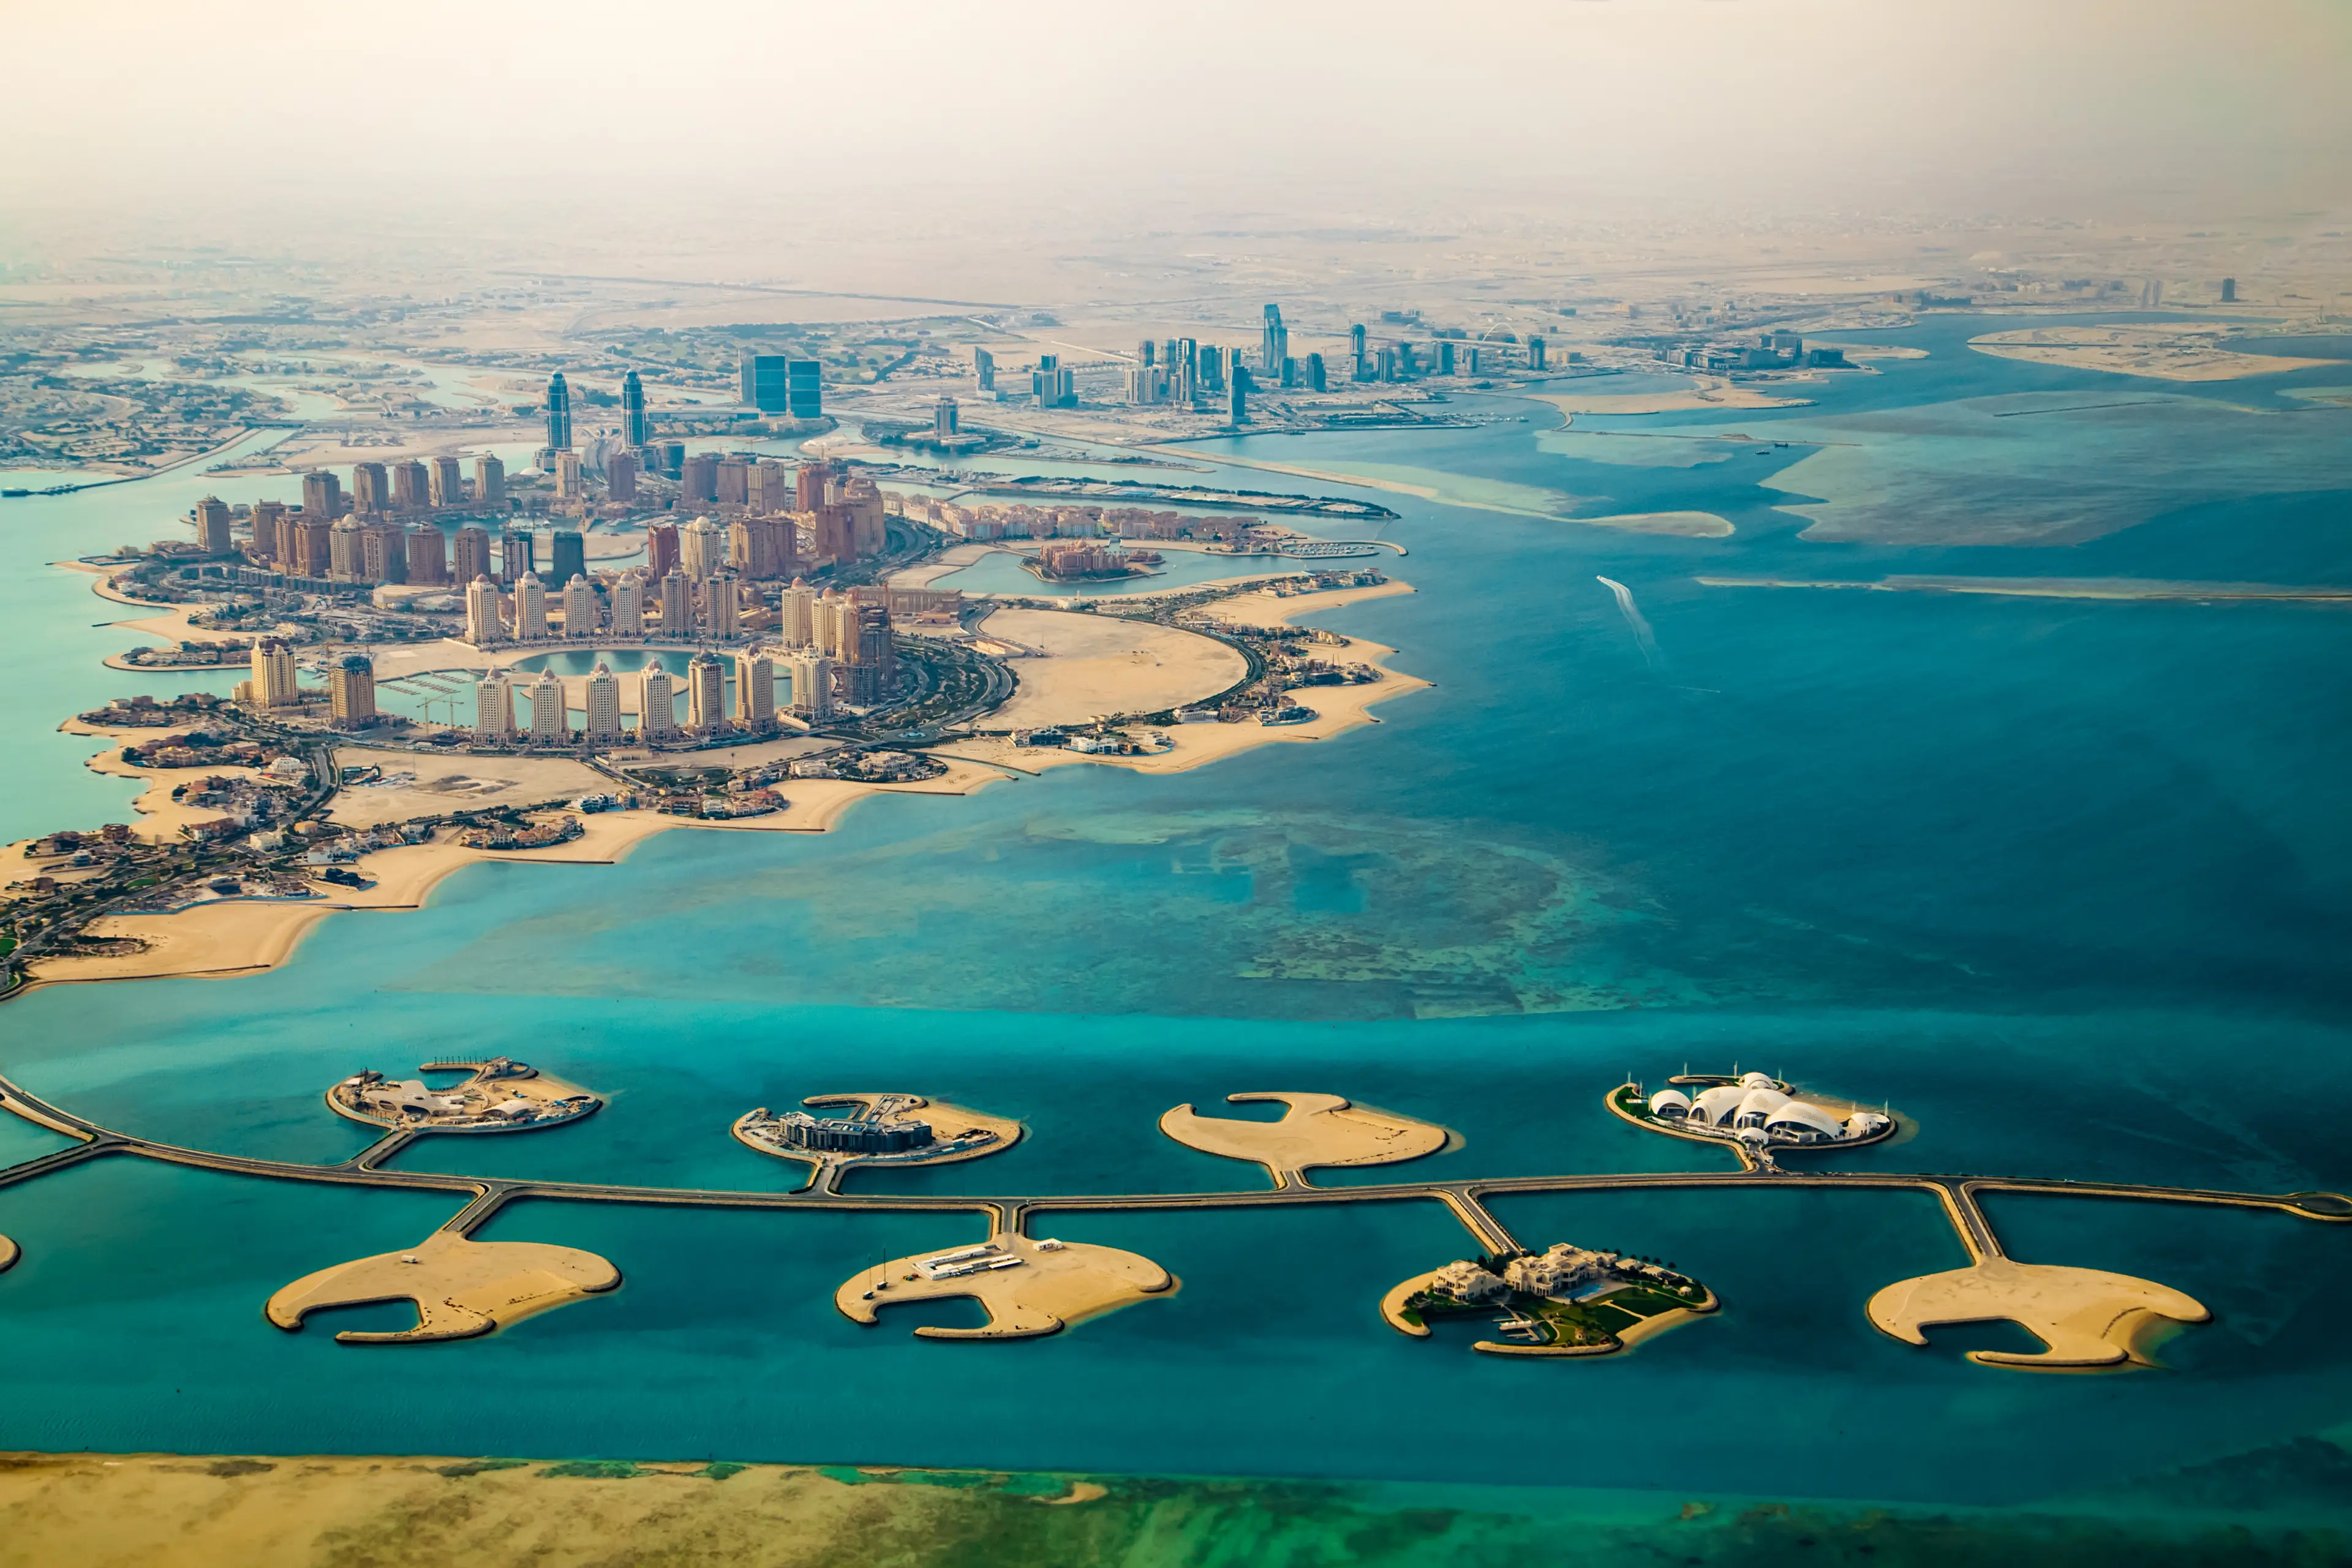 Aerial view of the capital of Qatar